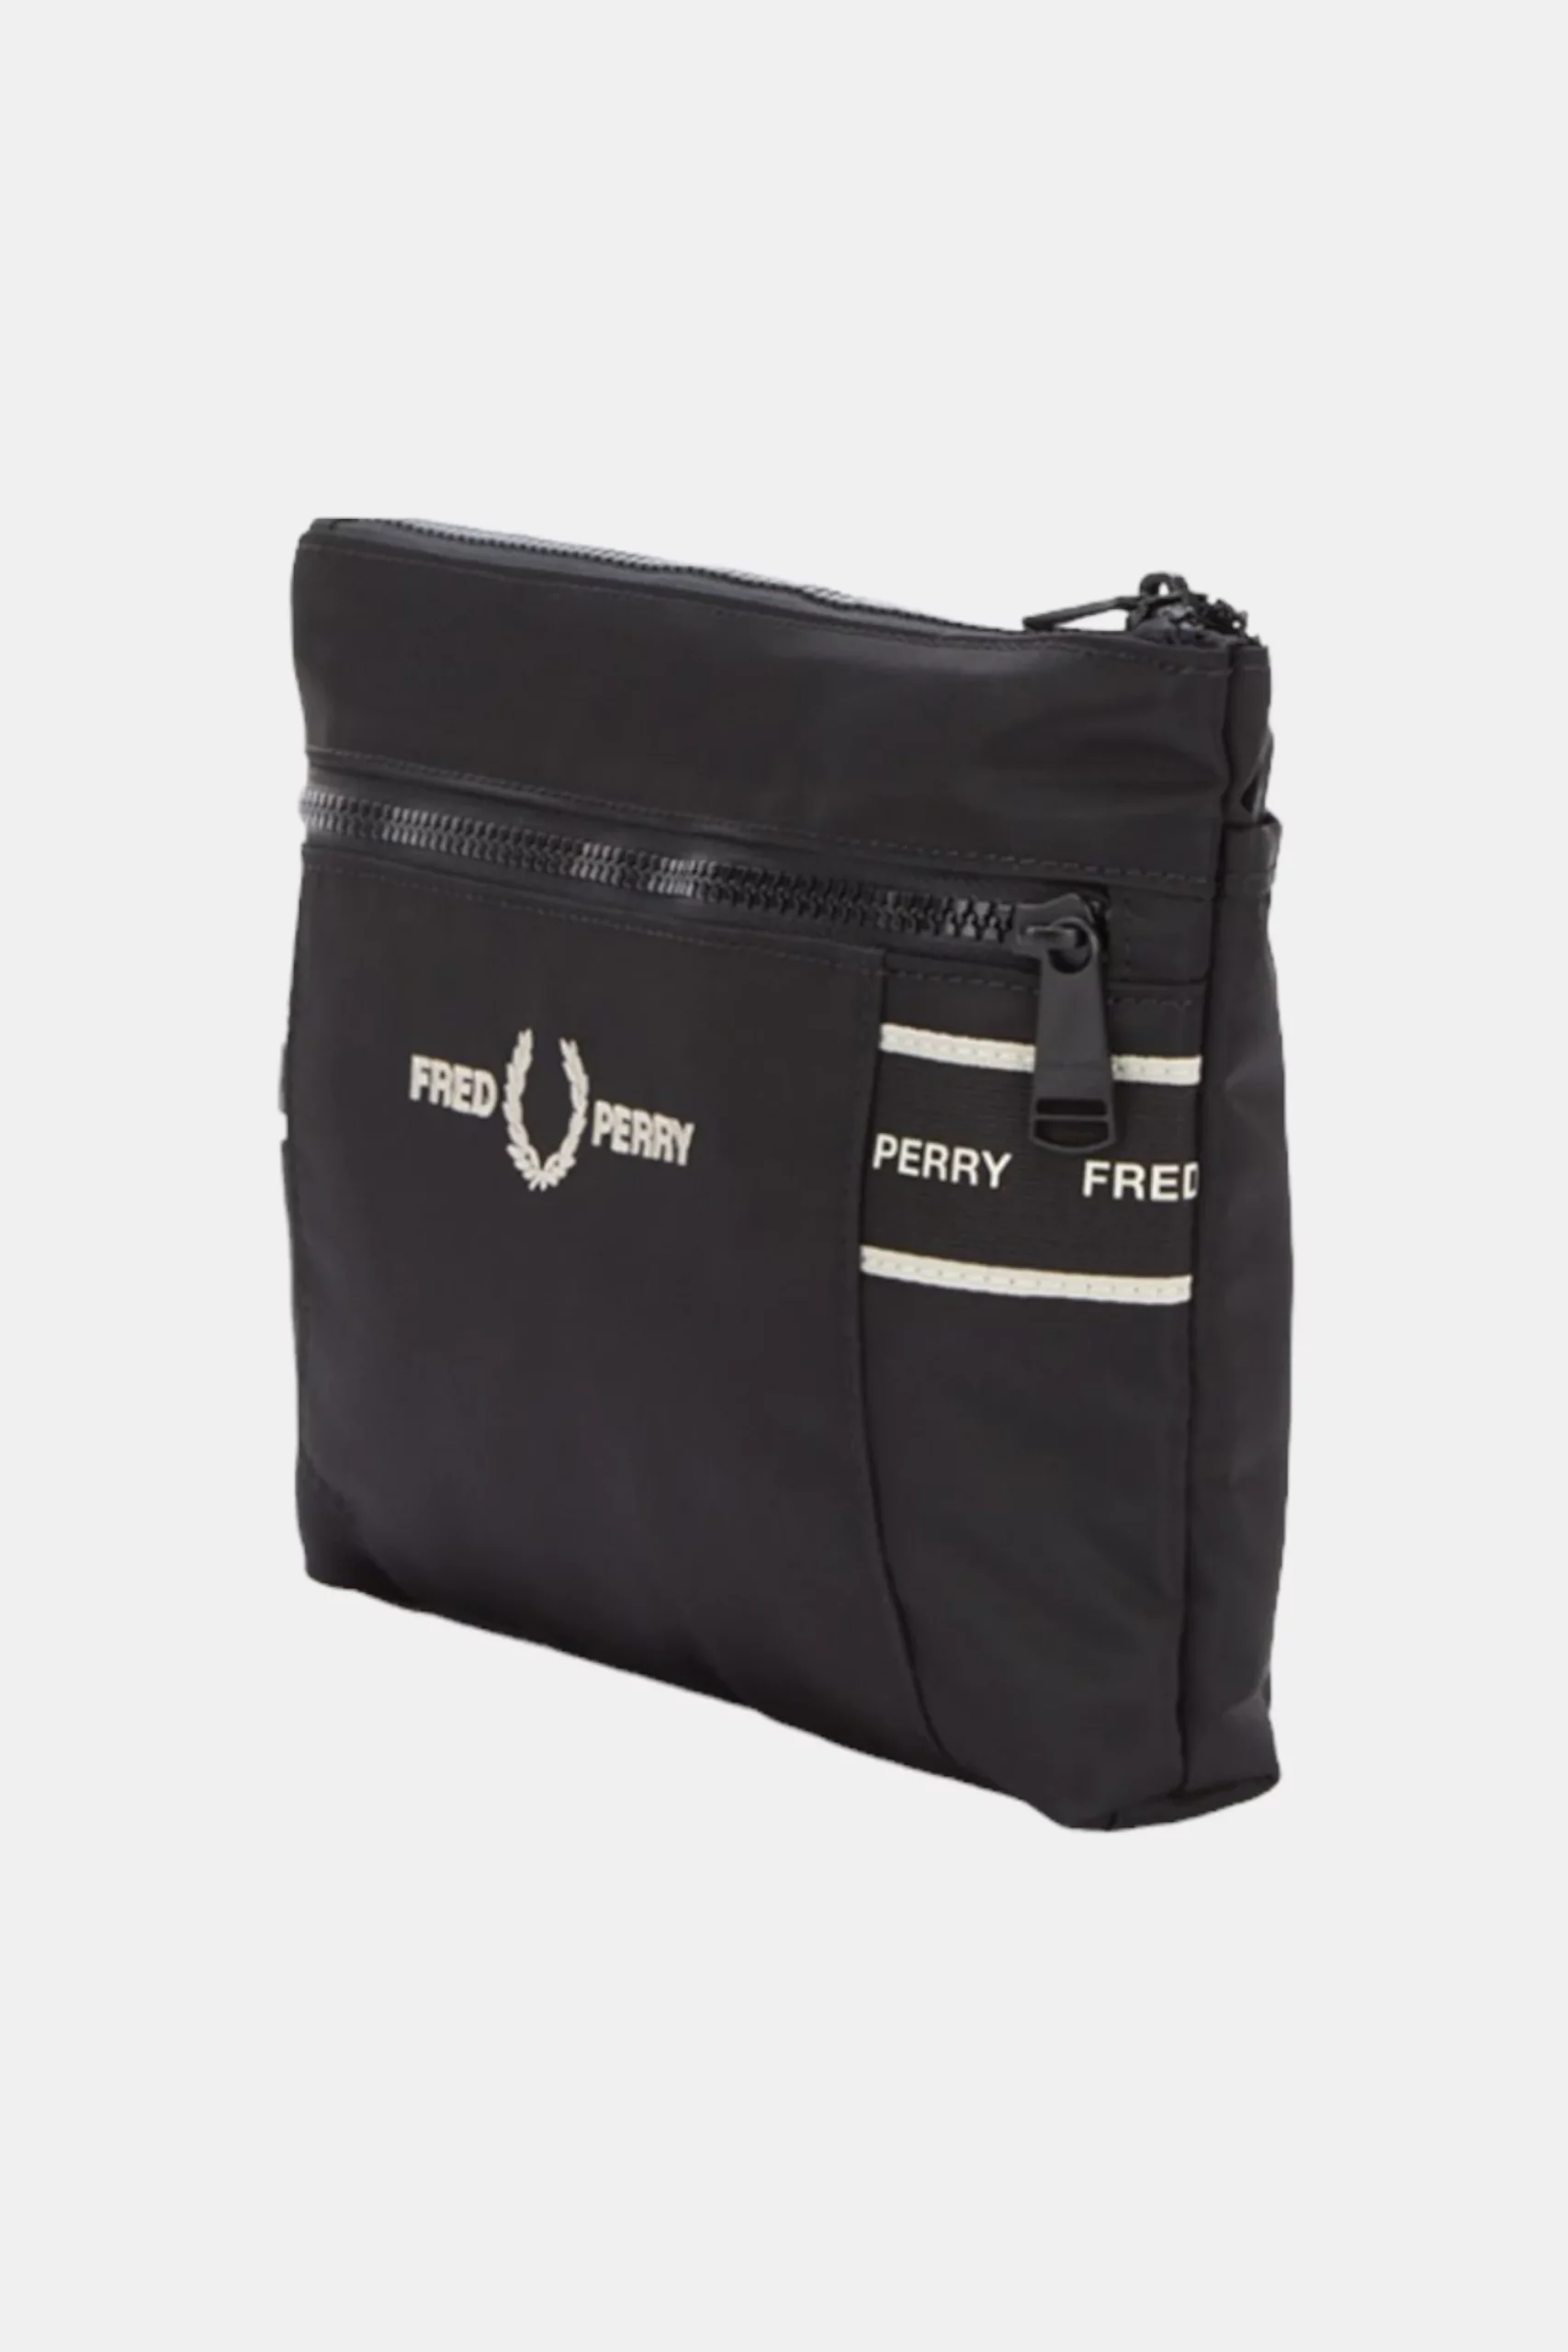 sumka fred perry grapic tape black 2